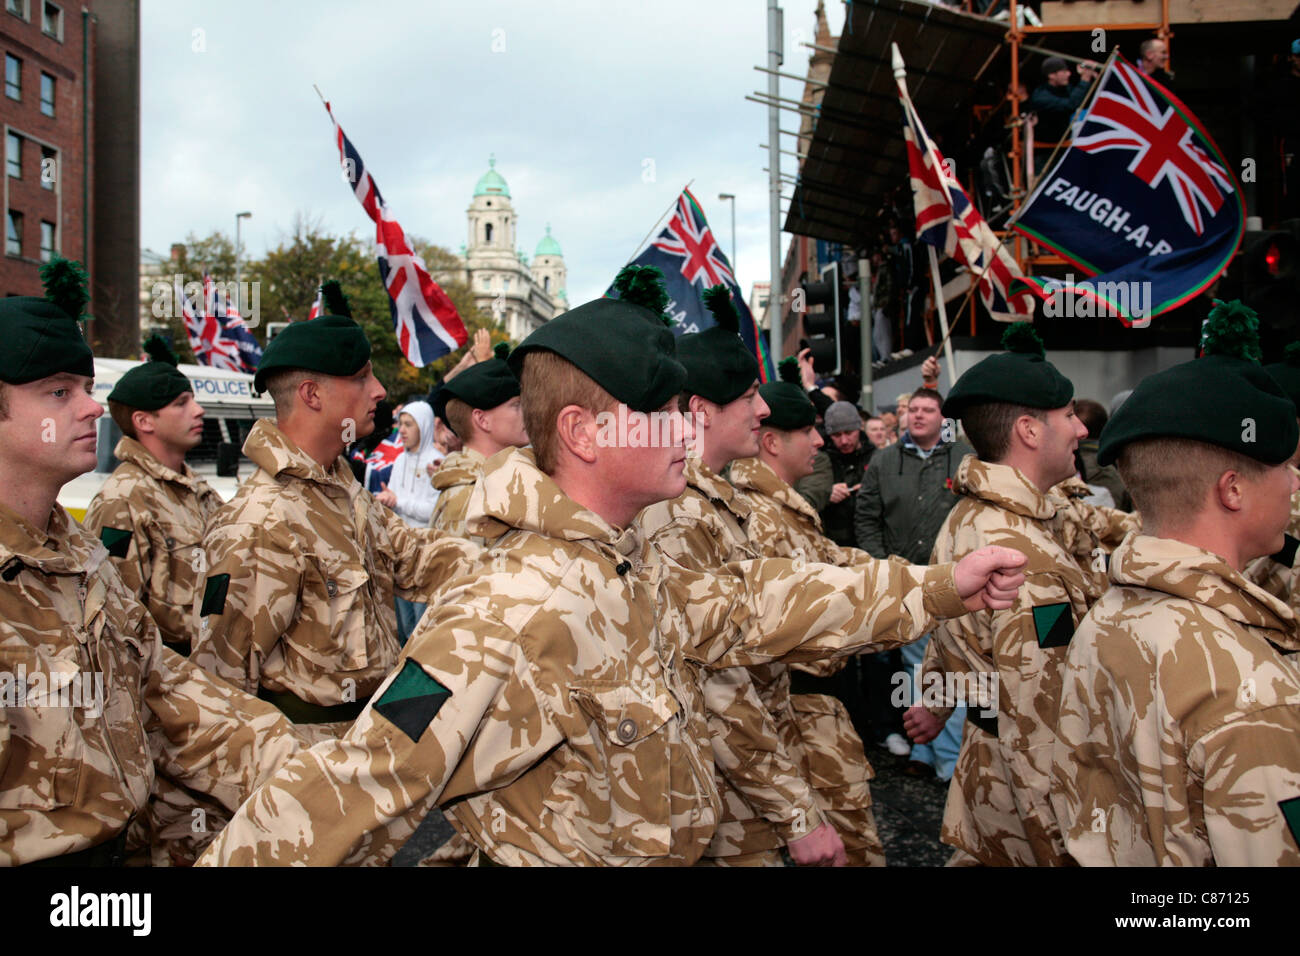 Royal Irish Regiment soldiers walk past loyalist supporters at the Royal Irish Regiment RIR Homecoming Parade in Belfast on September 02, 2008 in Belfast, Northern Ireland. The parade, which passed relatively peacefully, was for troops returning from Iraq and Afghanistan. Stock Photo